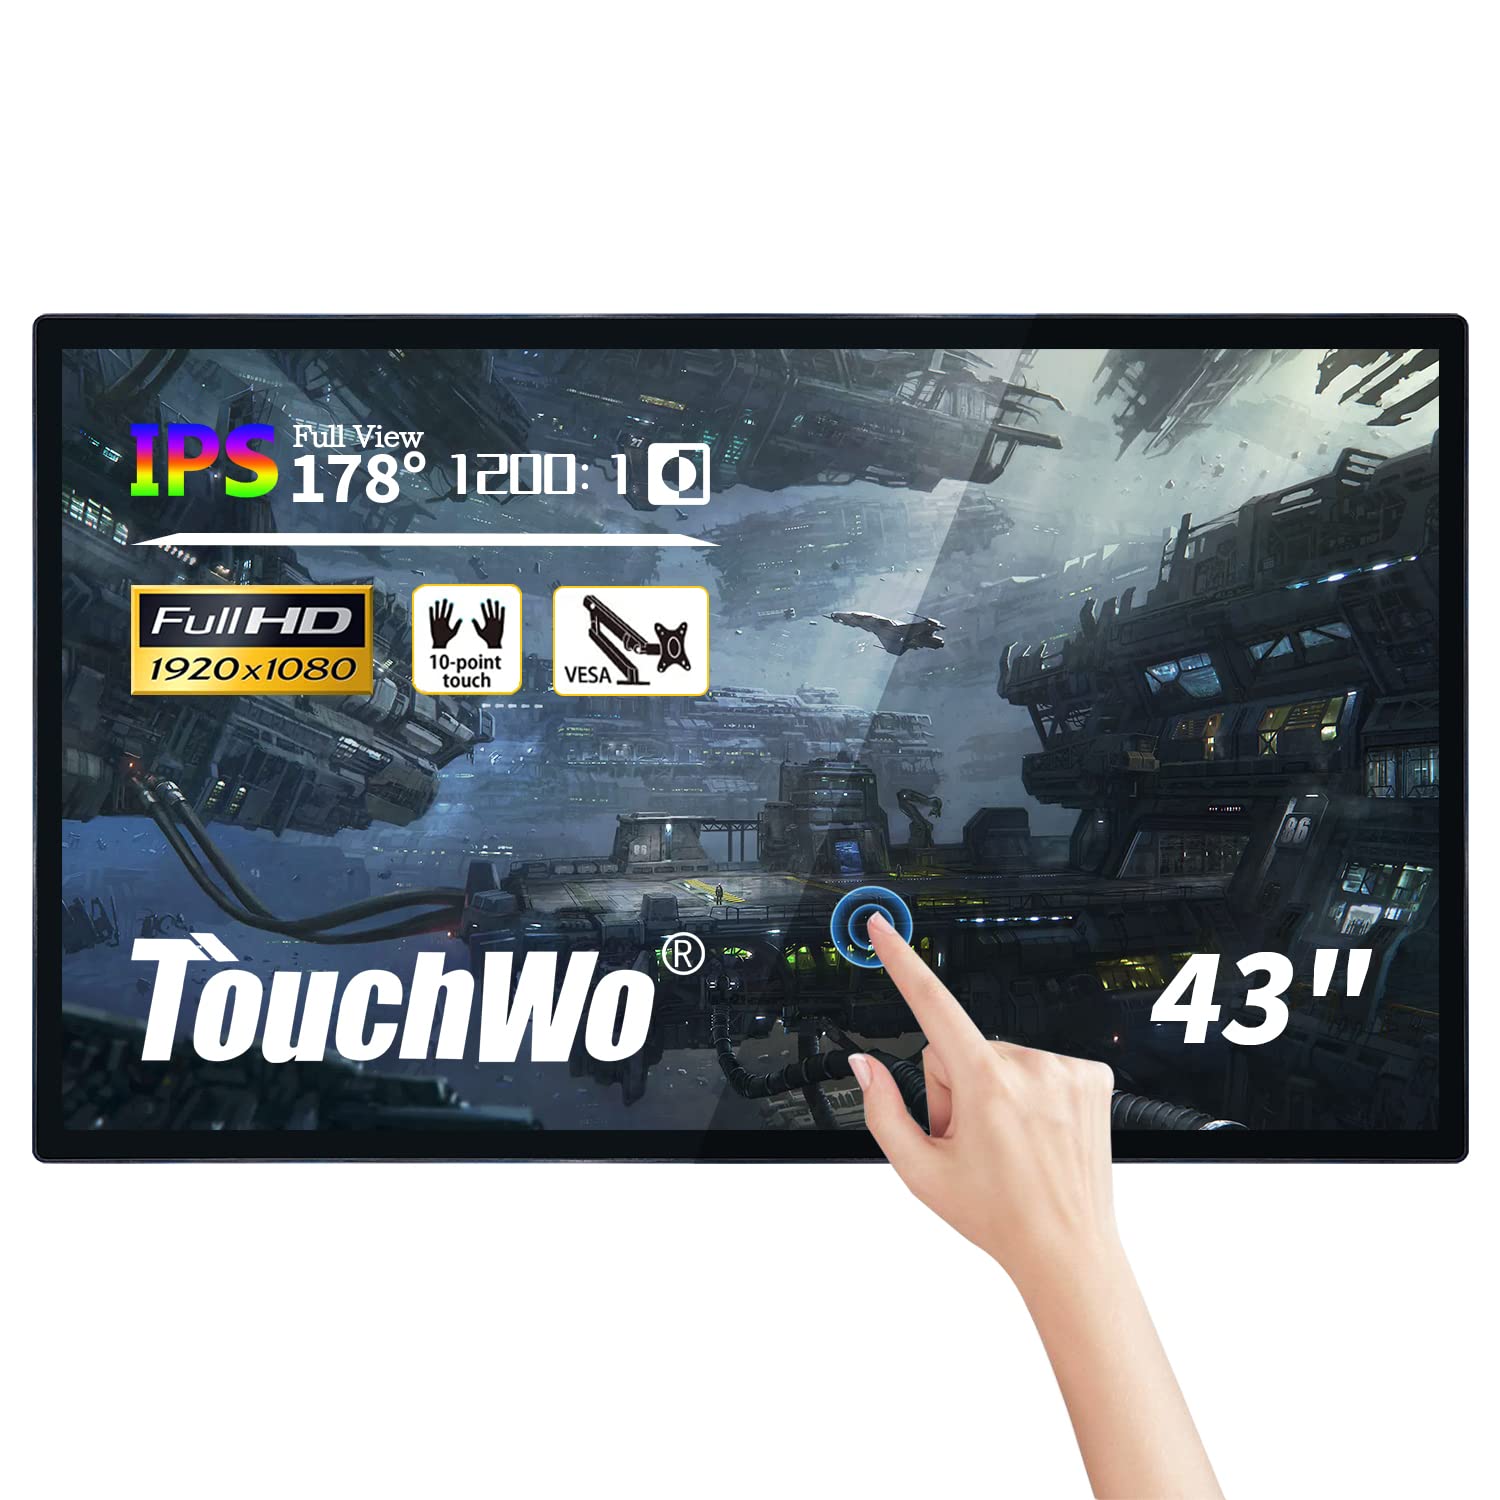 TouchWo 43 inch Interactive Touchscreen Monitor, Digital Electronic Whiteboard with 16:9 FHD 1080P Display, Windows 10 All-in-One Smart Board for Office and Classroom, Core i7 RAM 8G & ROM 256G